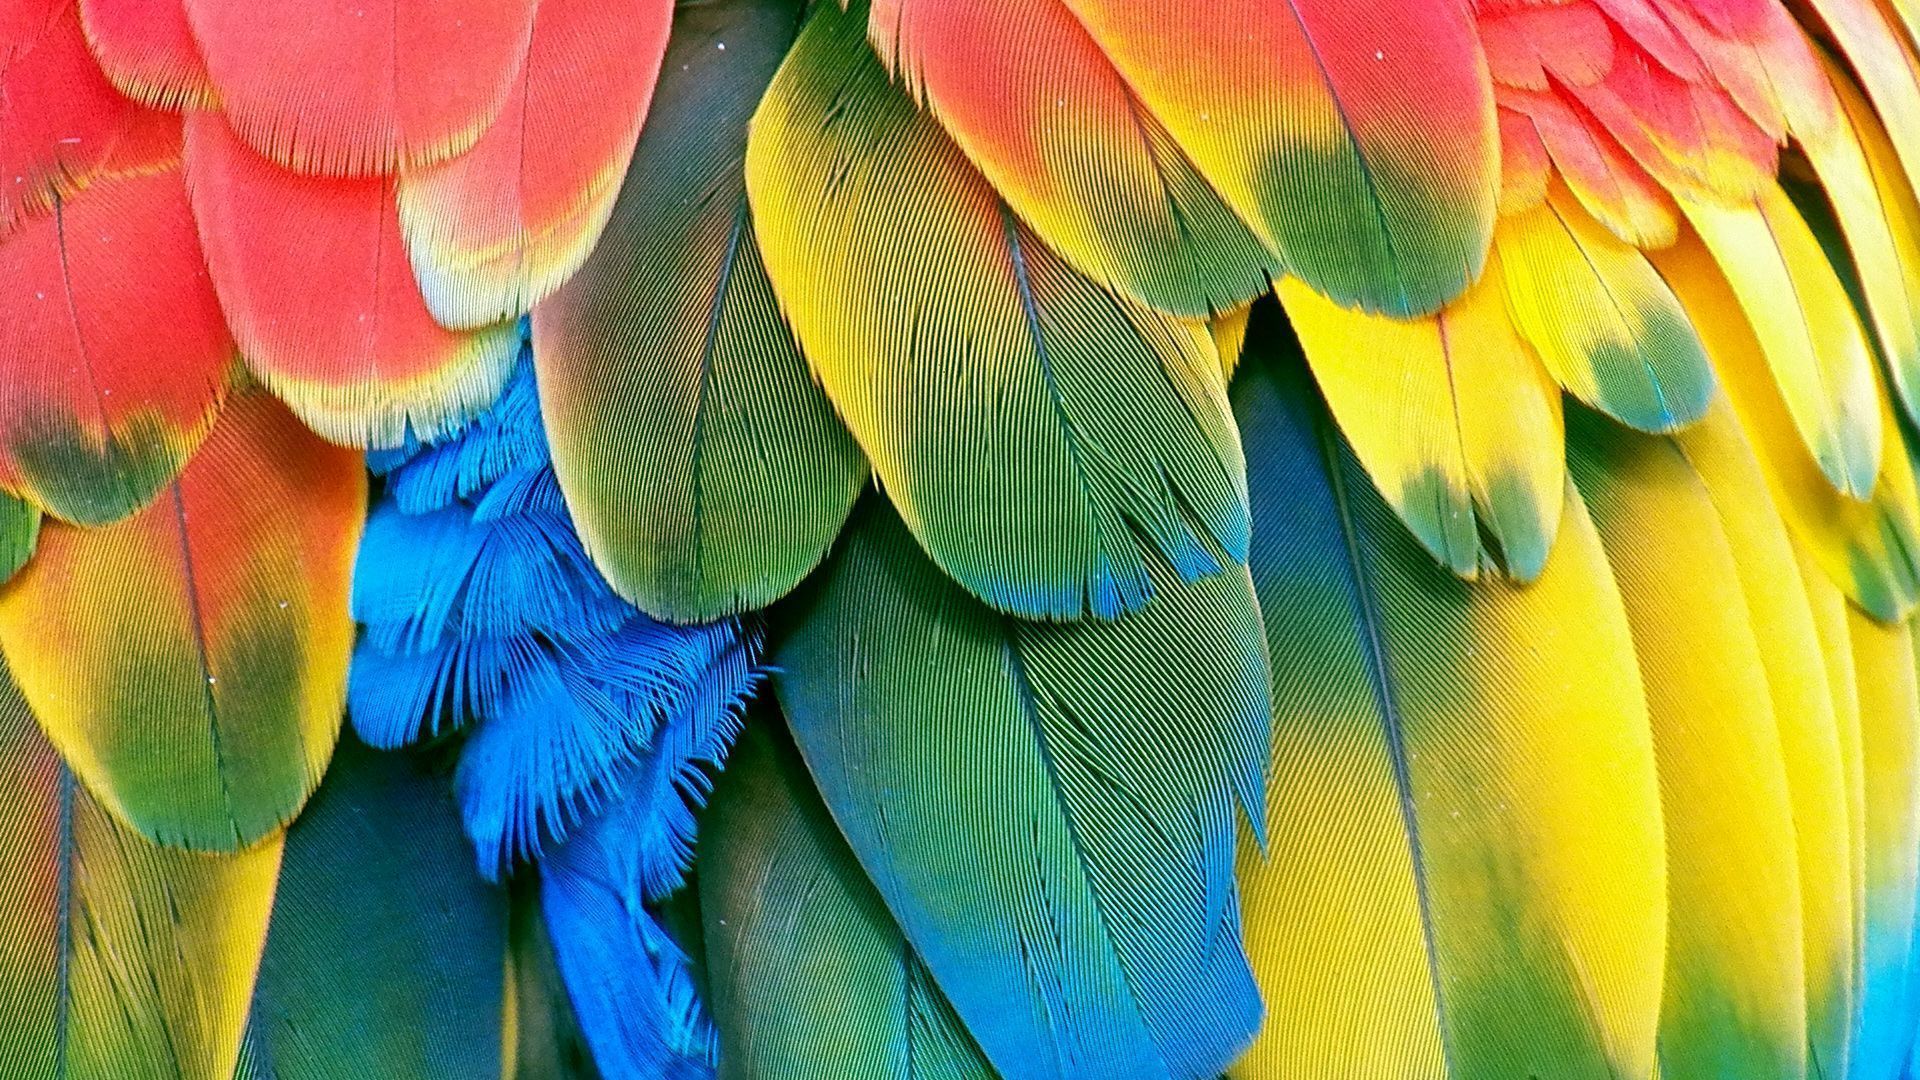 Parrot Background